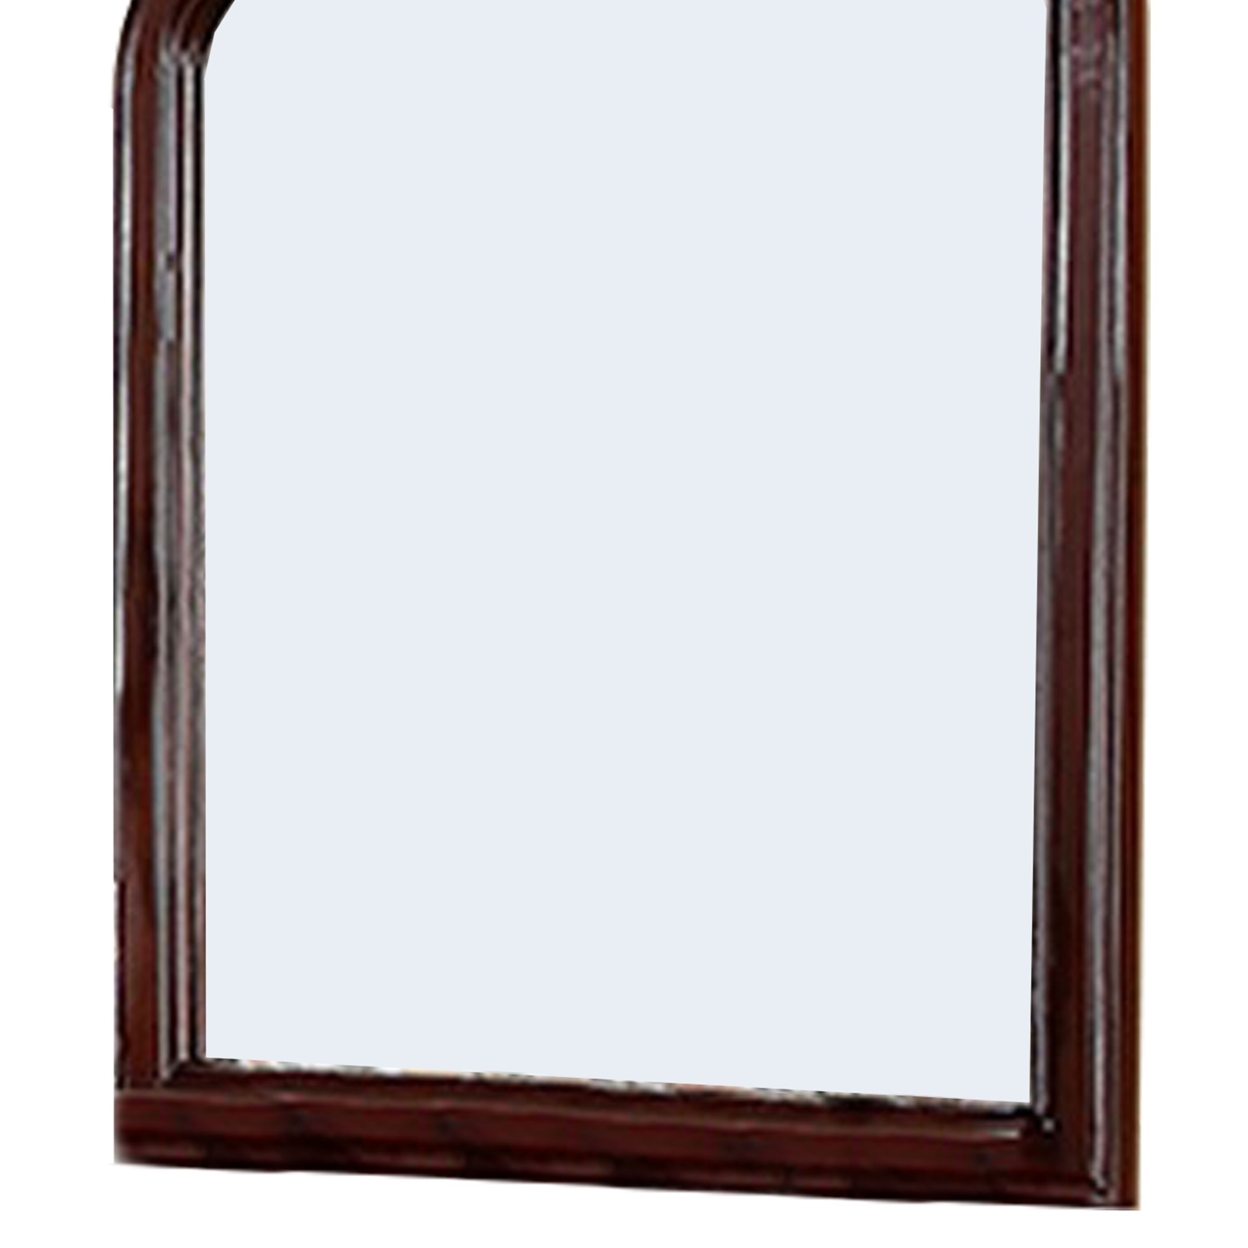 37 Inches Wooden Mirror With Curved Edges, Brown- Saltoro Sherpi